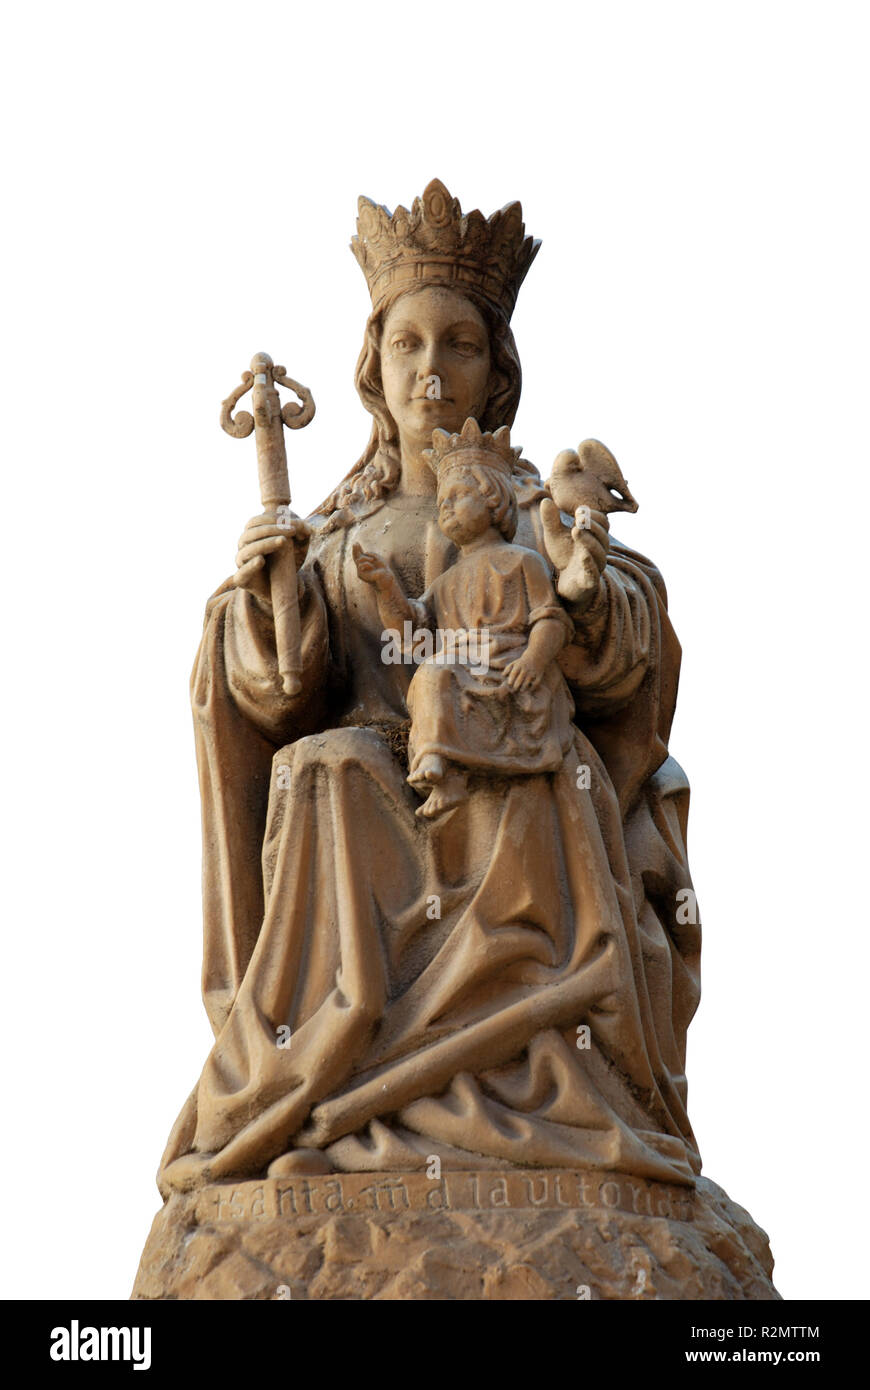 statue of madonna with baby jesus Stock Photo